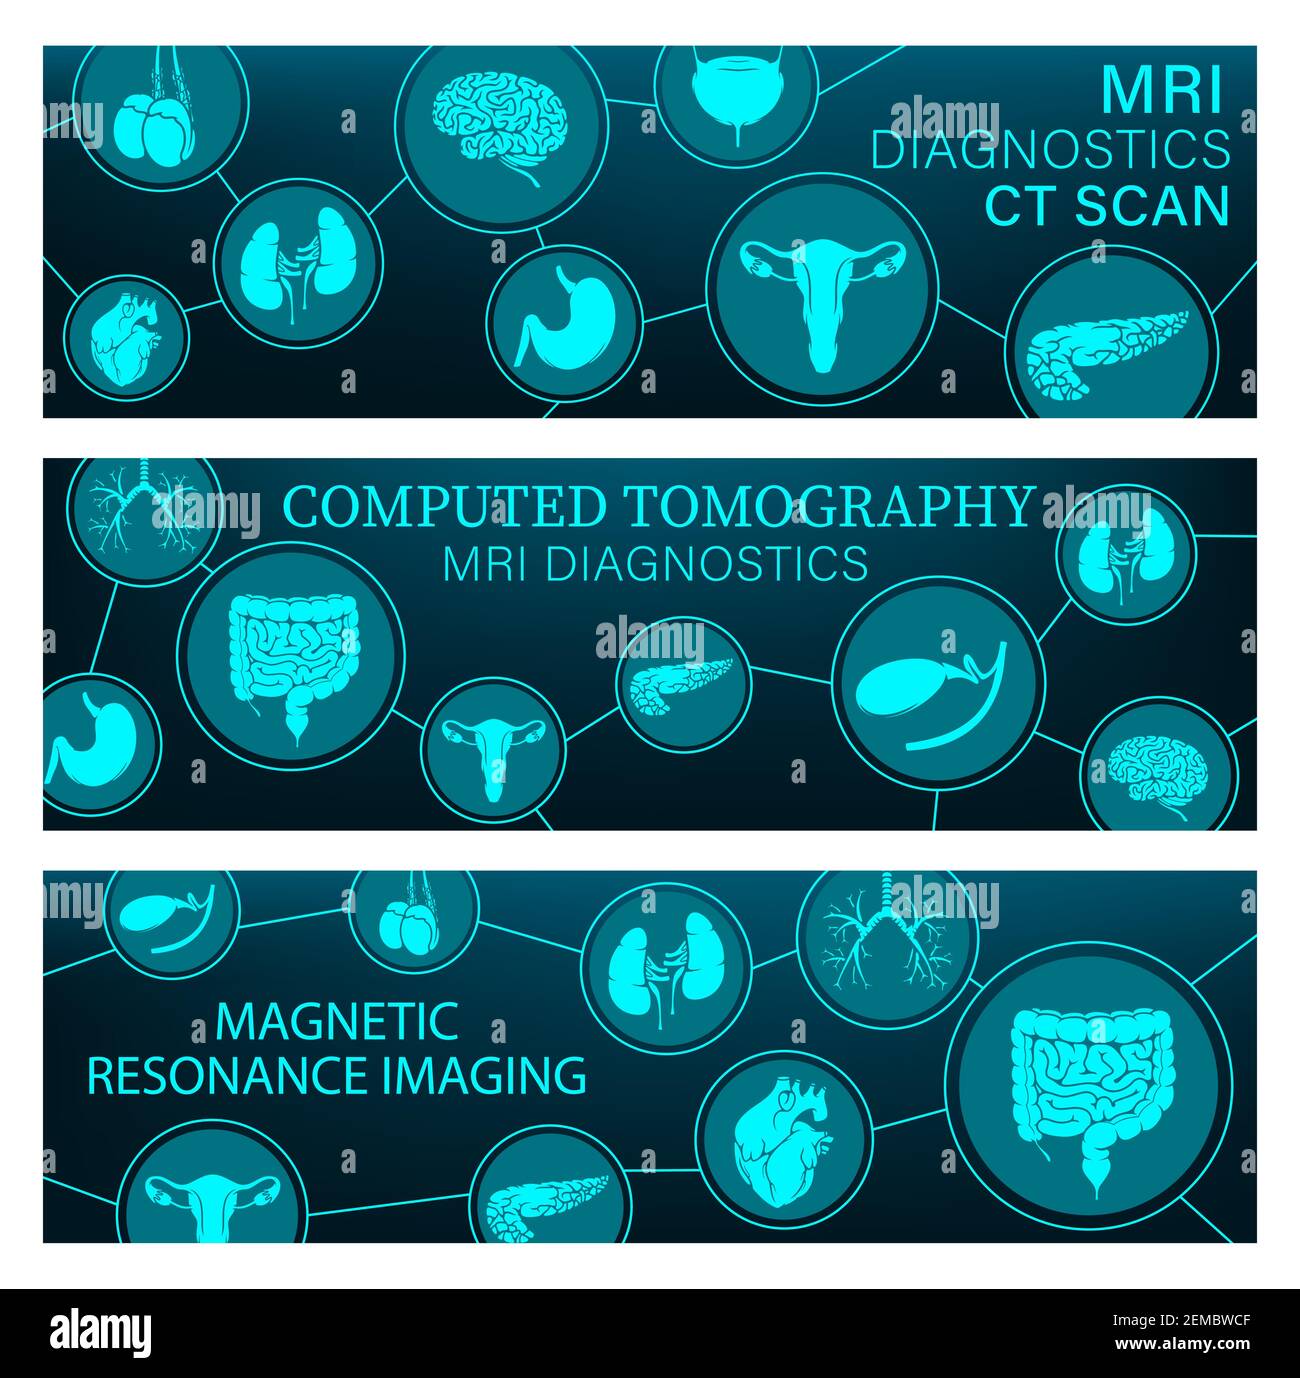 MRI diagnostics and CT scans of organs, brain and heart vector banners of diagnostic medicine. Magnetic resonance imaging and computed tomography scan Stock Vector